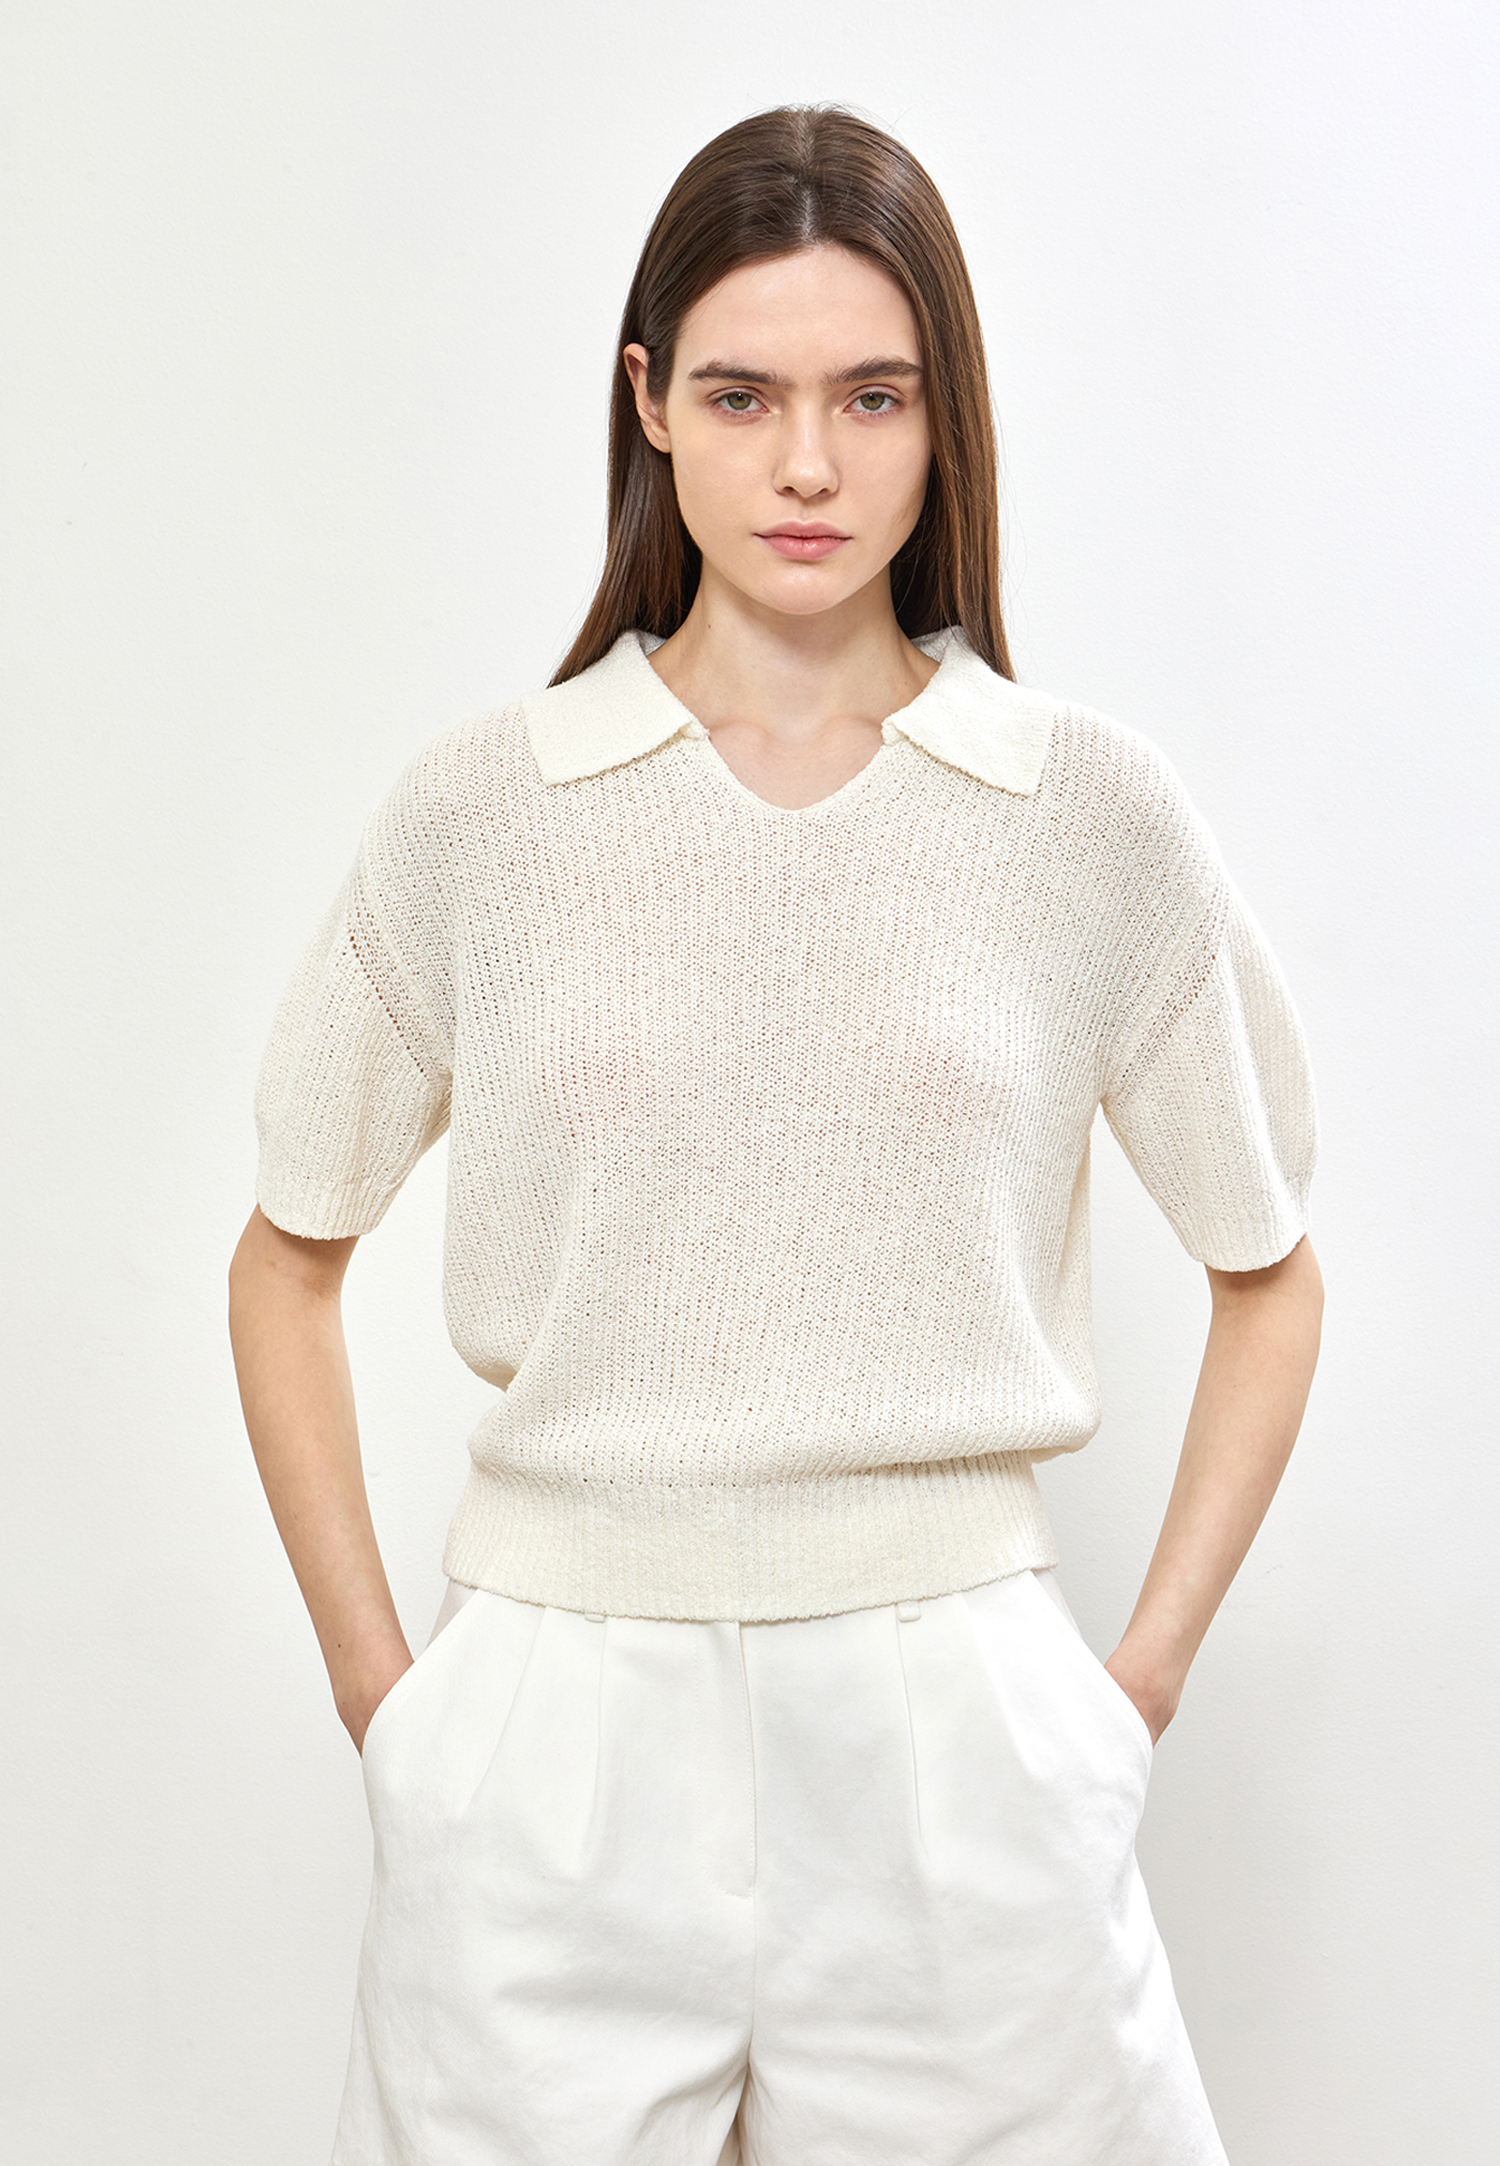 OPEN COLLAR KNIT TOP - WHITE